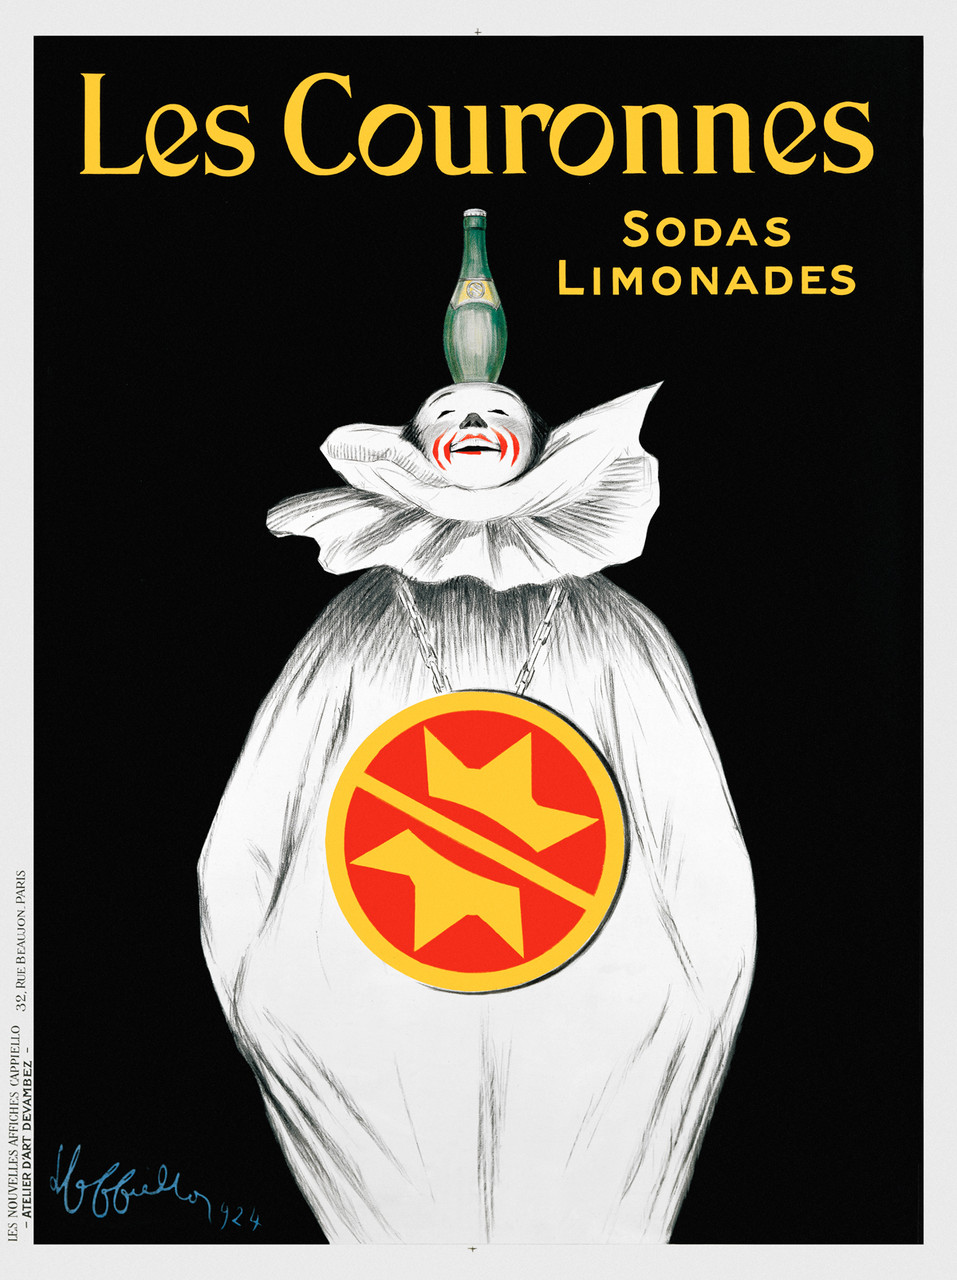 Les Couronnes Sodas Limonades by Leonetto Cappiello 1924 France Vintage Poster Reproduction. This soda advertisement features a clown on a black background. He is wearing a white costume and has a bottle on his head. Giclee Advertising Prints.